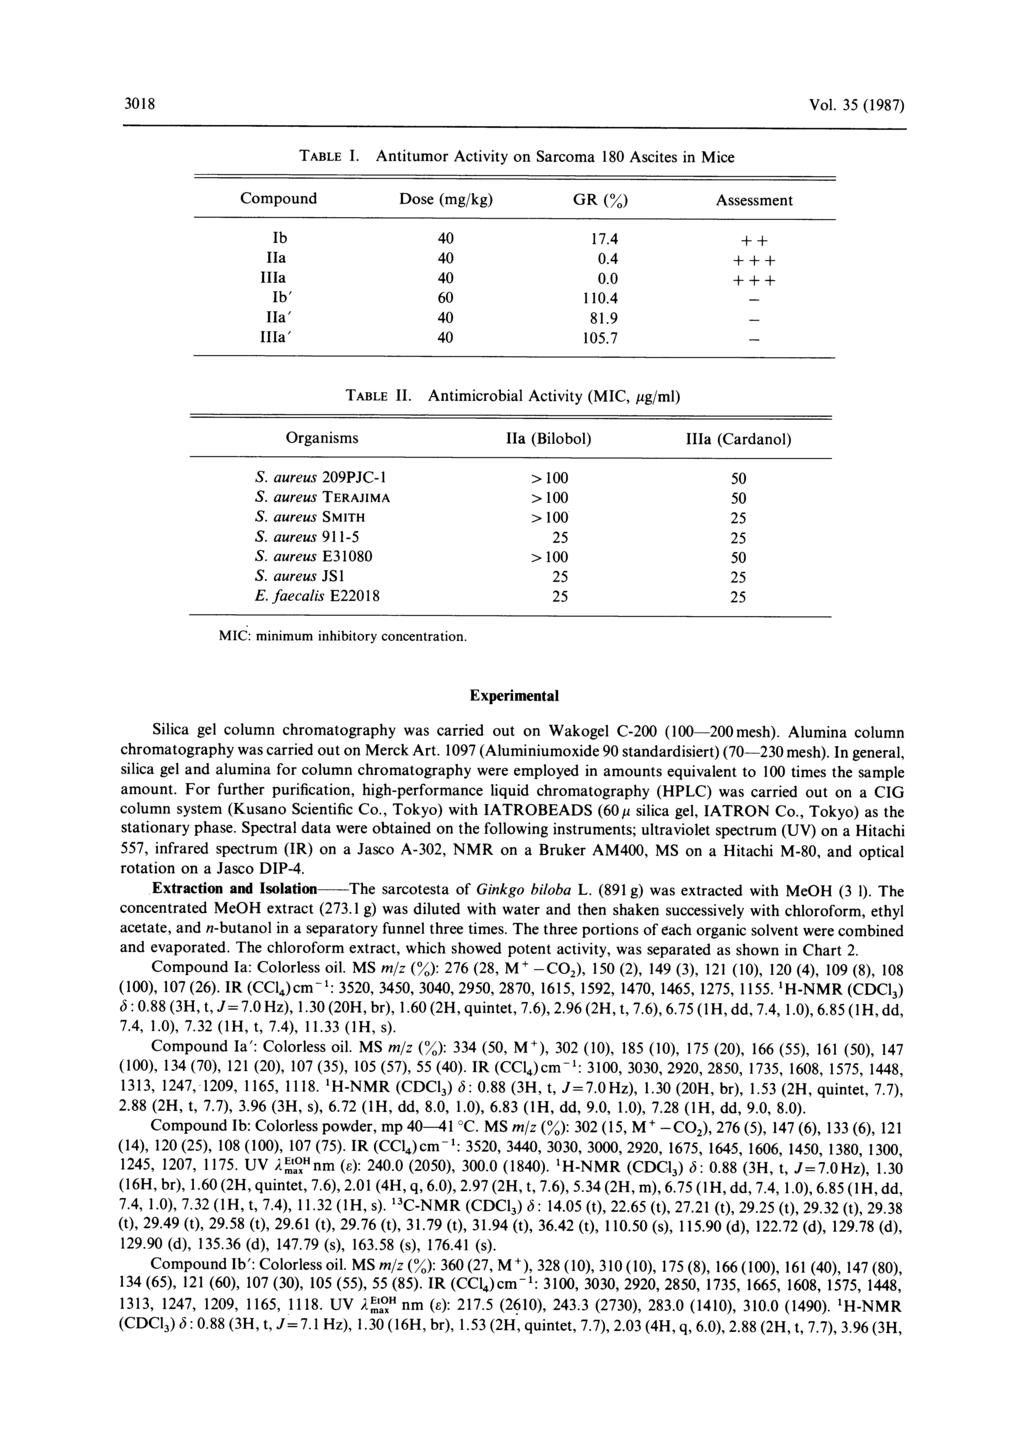 3018 Vol. 35 (1987) TABLE I. Antitumor Activity on Sarcoma 180 Ascites in Mice TABLE II.